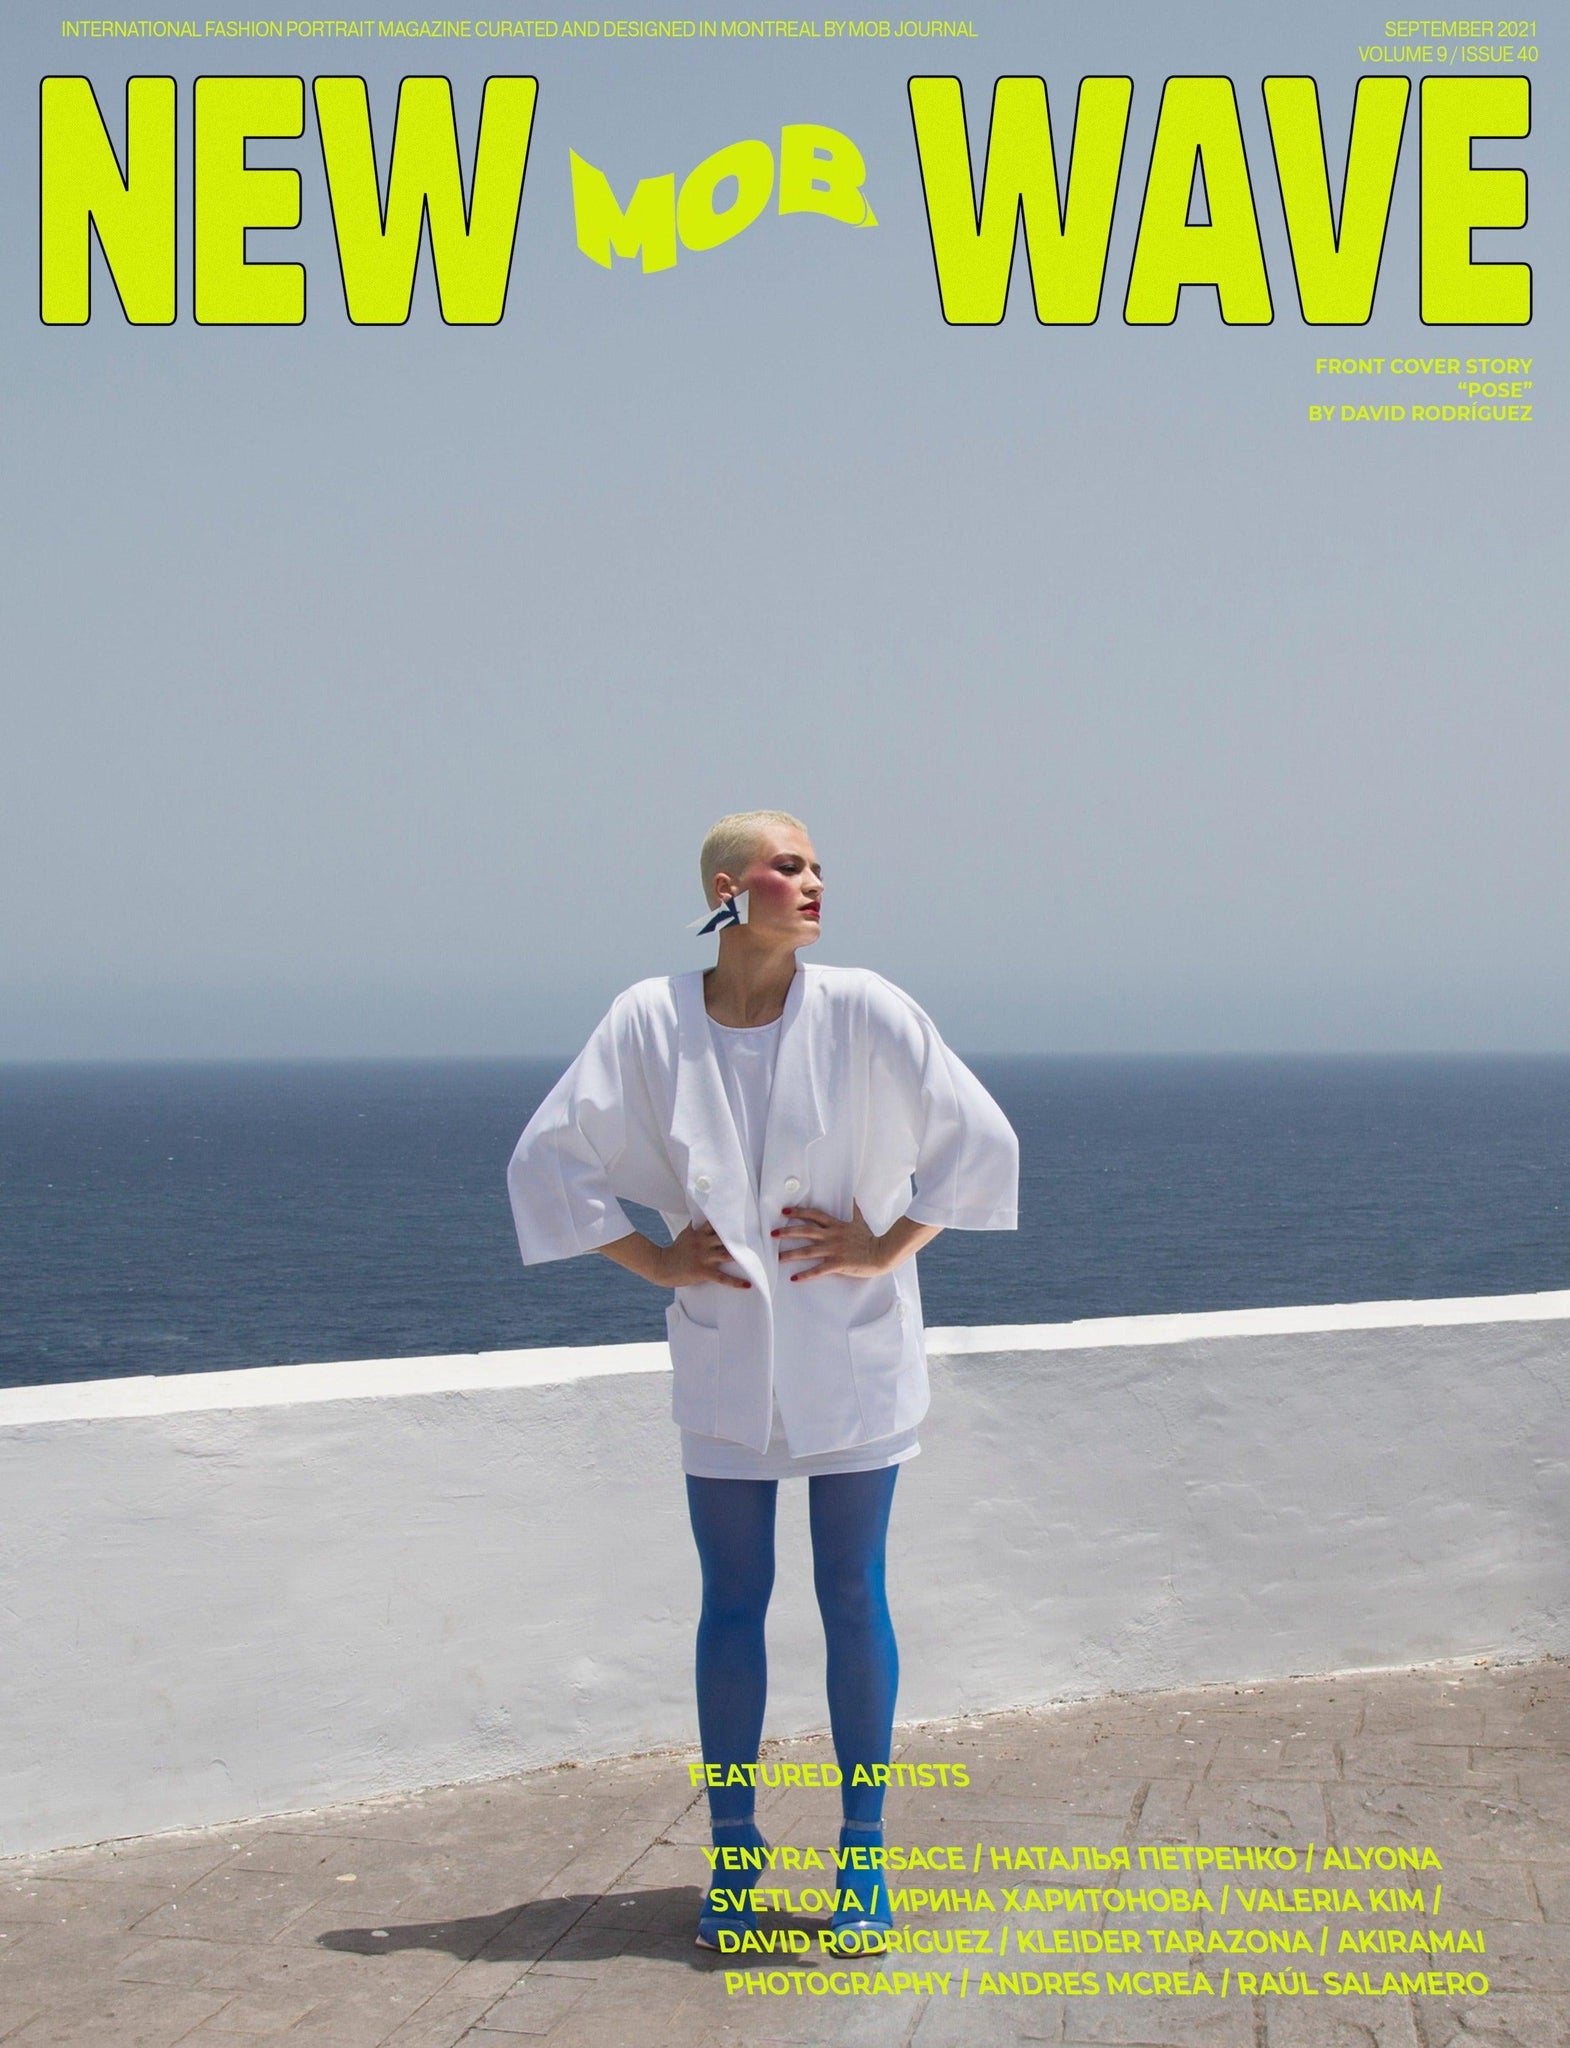 NEW WAVE | VOLUME NINE | ISSUE #40 - Mob Journal